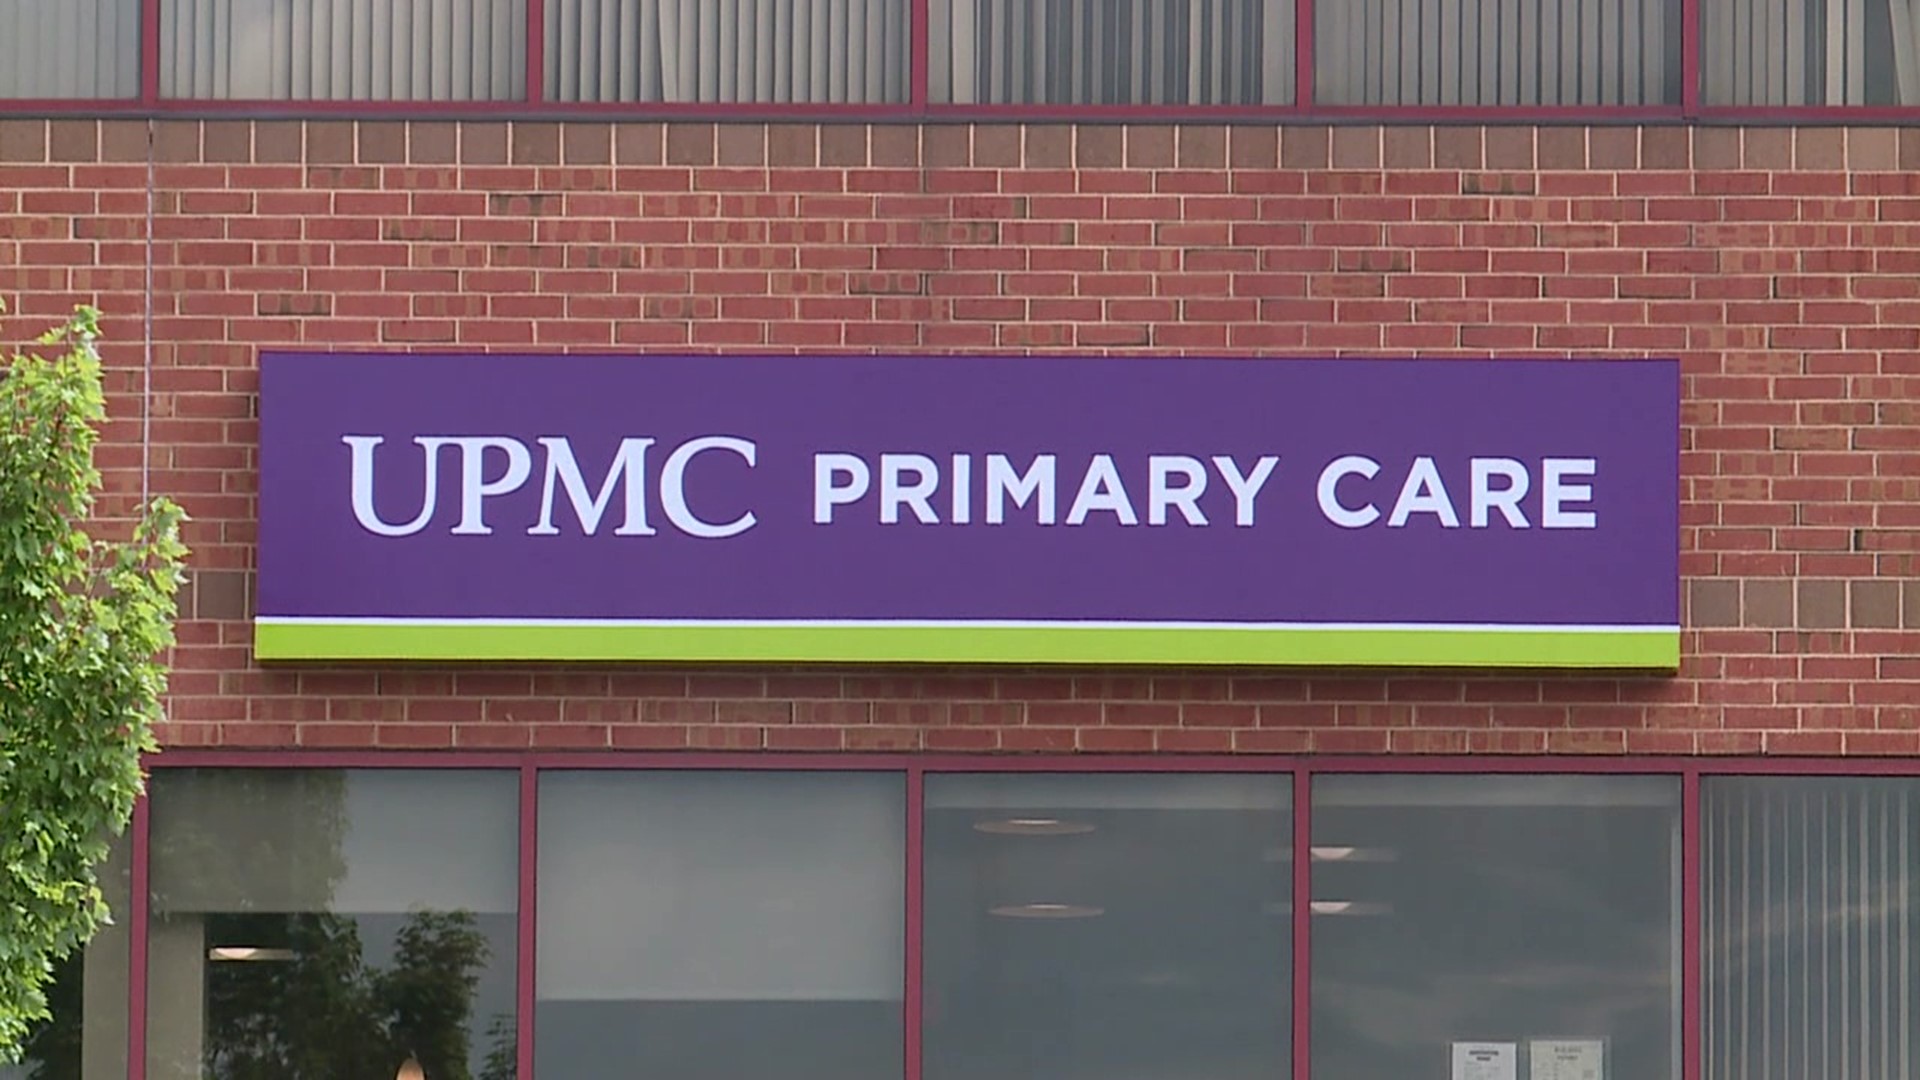 UPMC Primary Care will officially start accepting patients early next week.